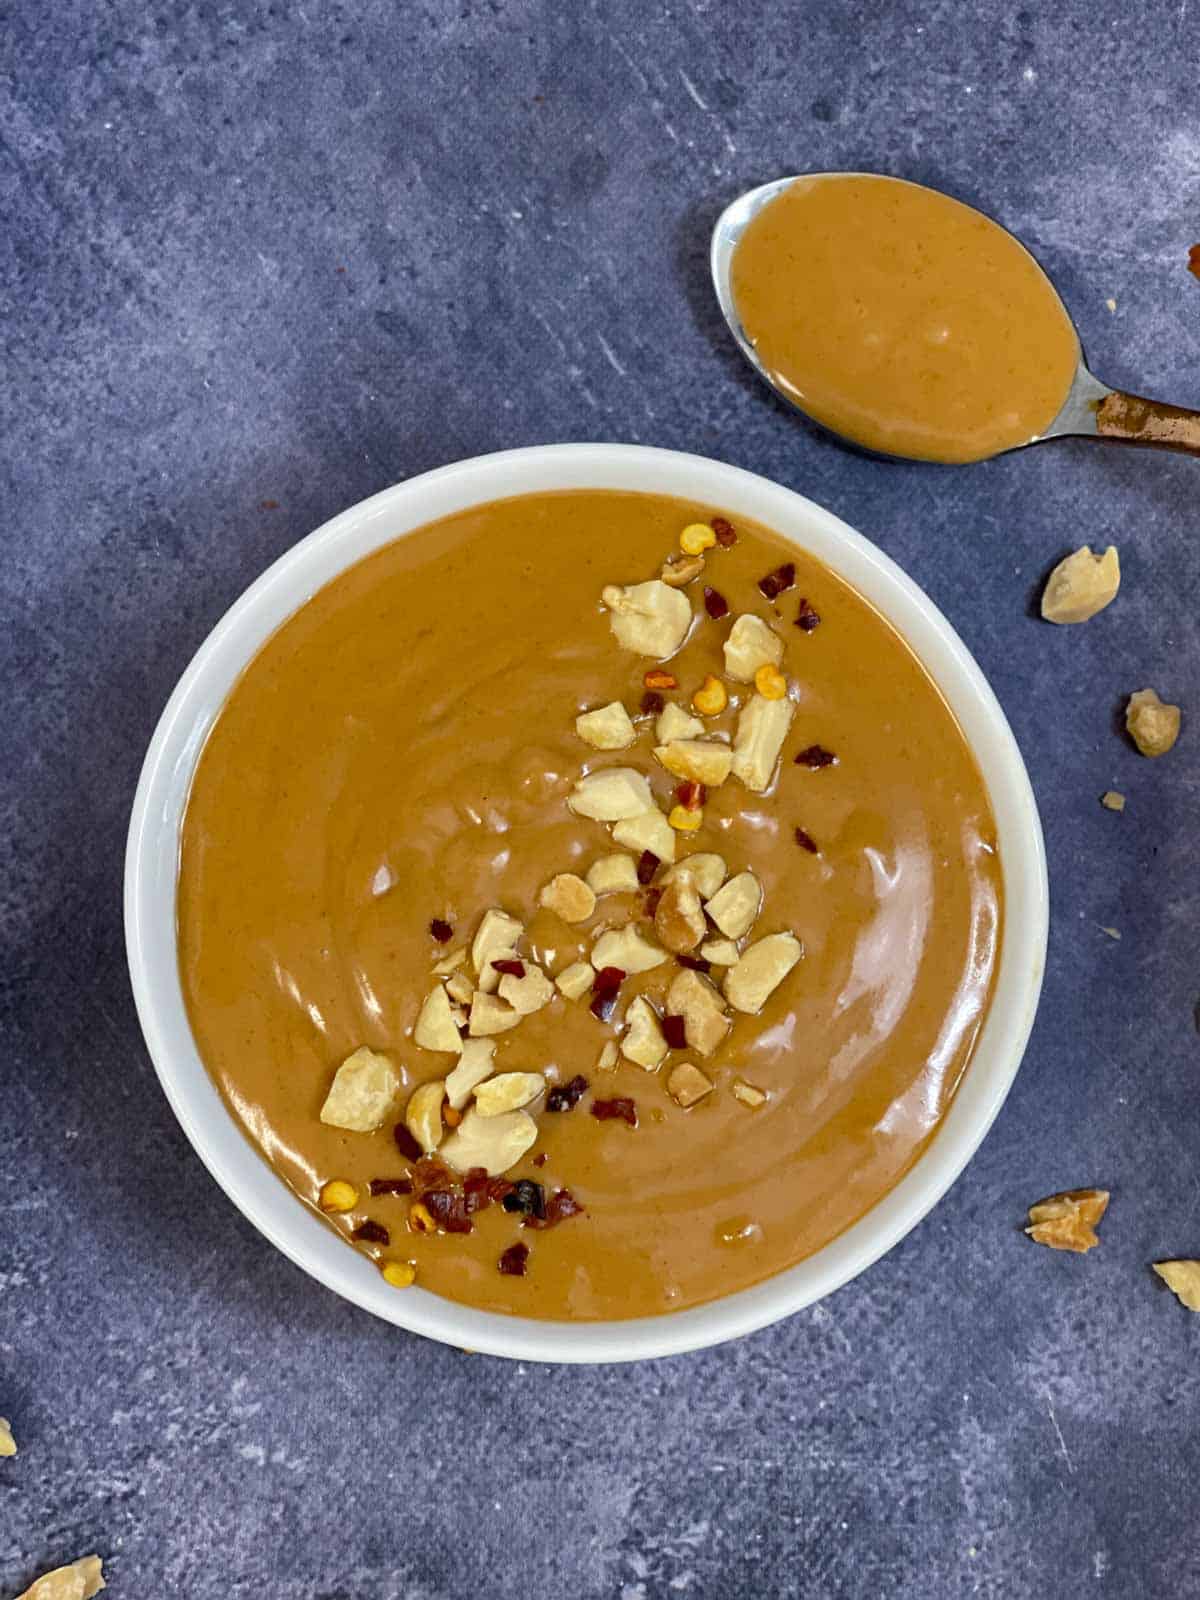 Thai peanut sauce {dressing} served in a bowl topped with roasted crushed peanuts and chili flakes with spoon full of the saue on the side